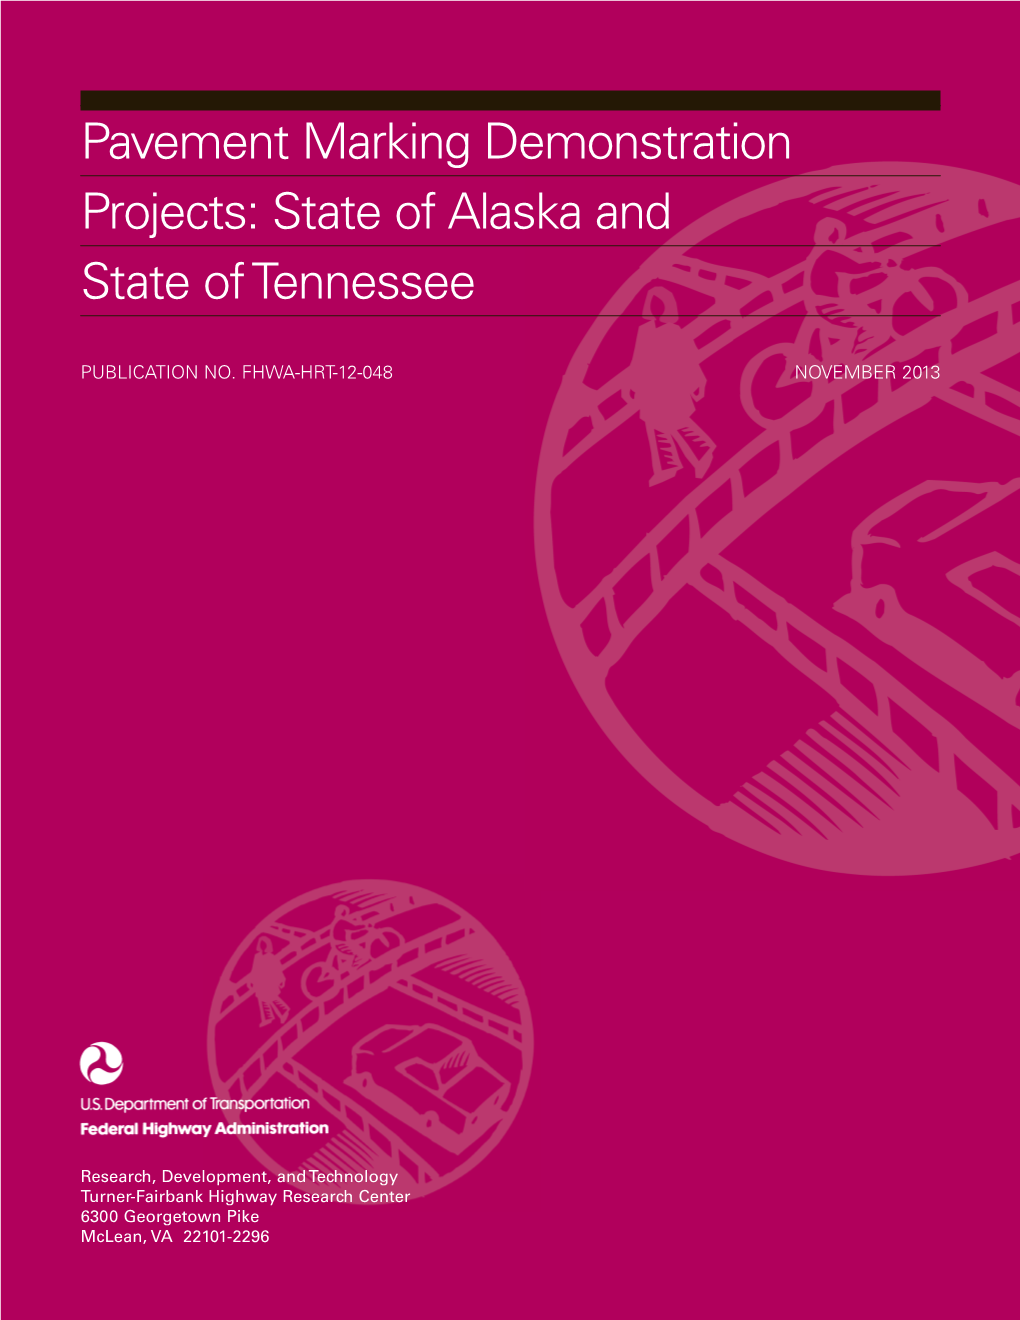 Pavement Marking Demonstration Projects: State of Alaska and State of Tennessee